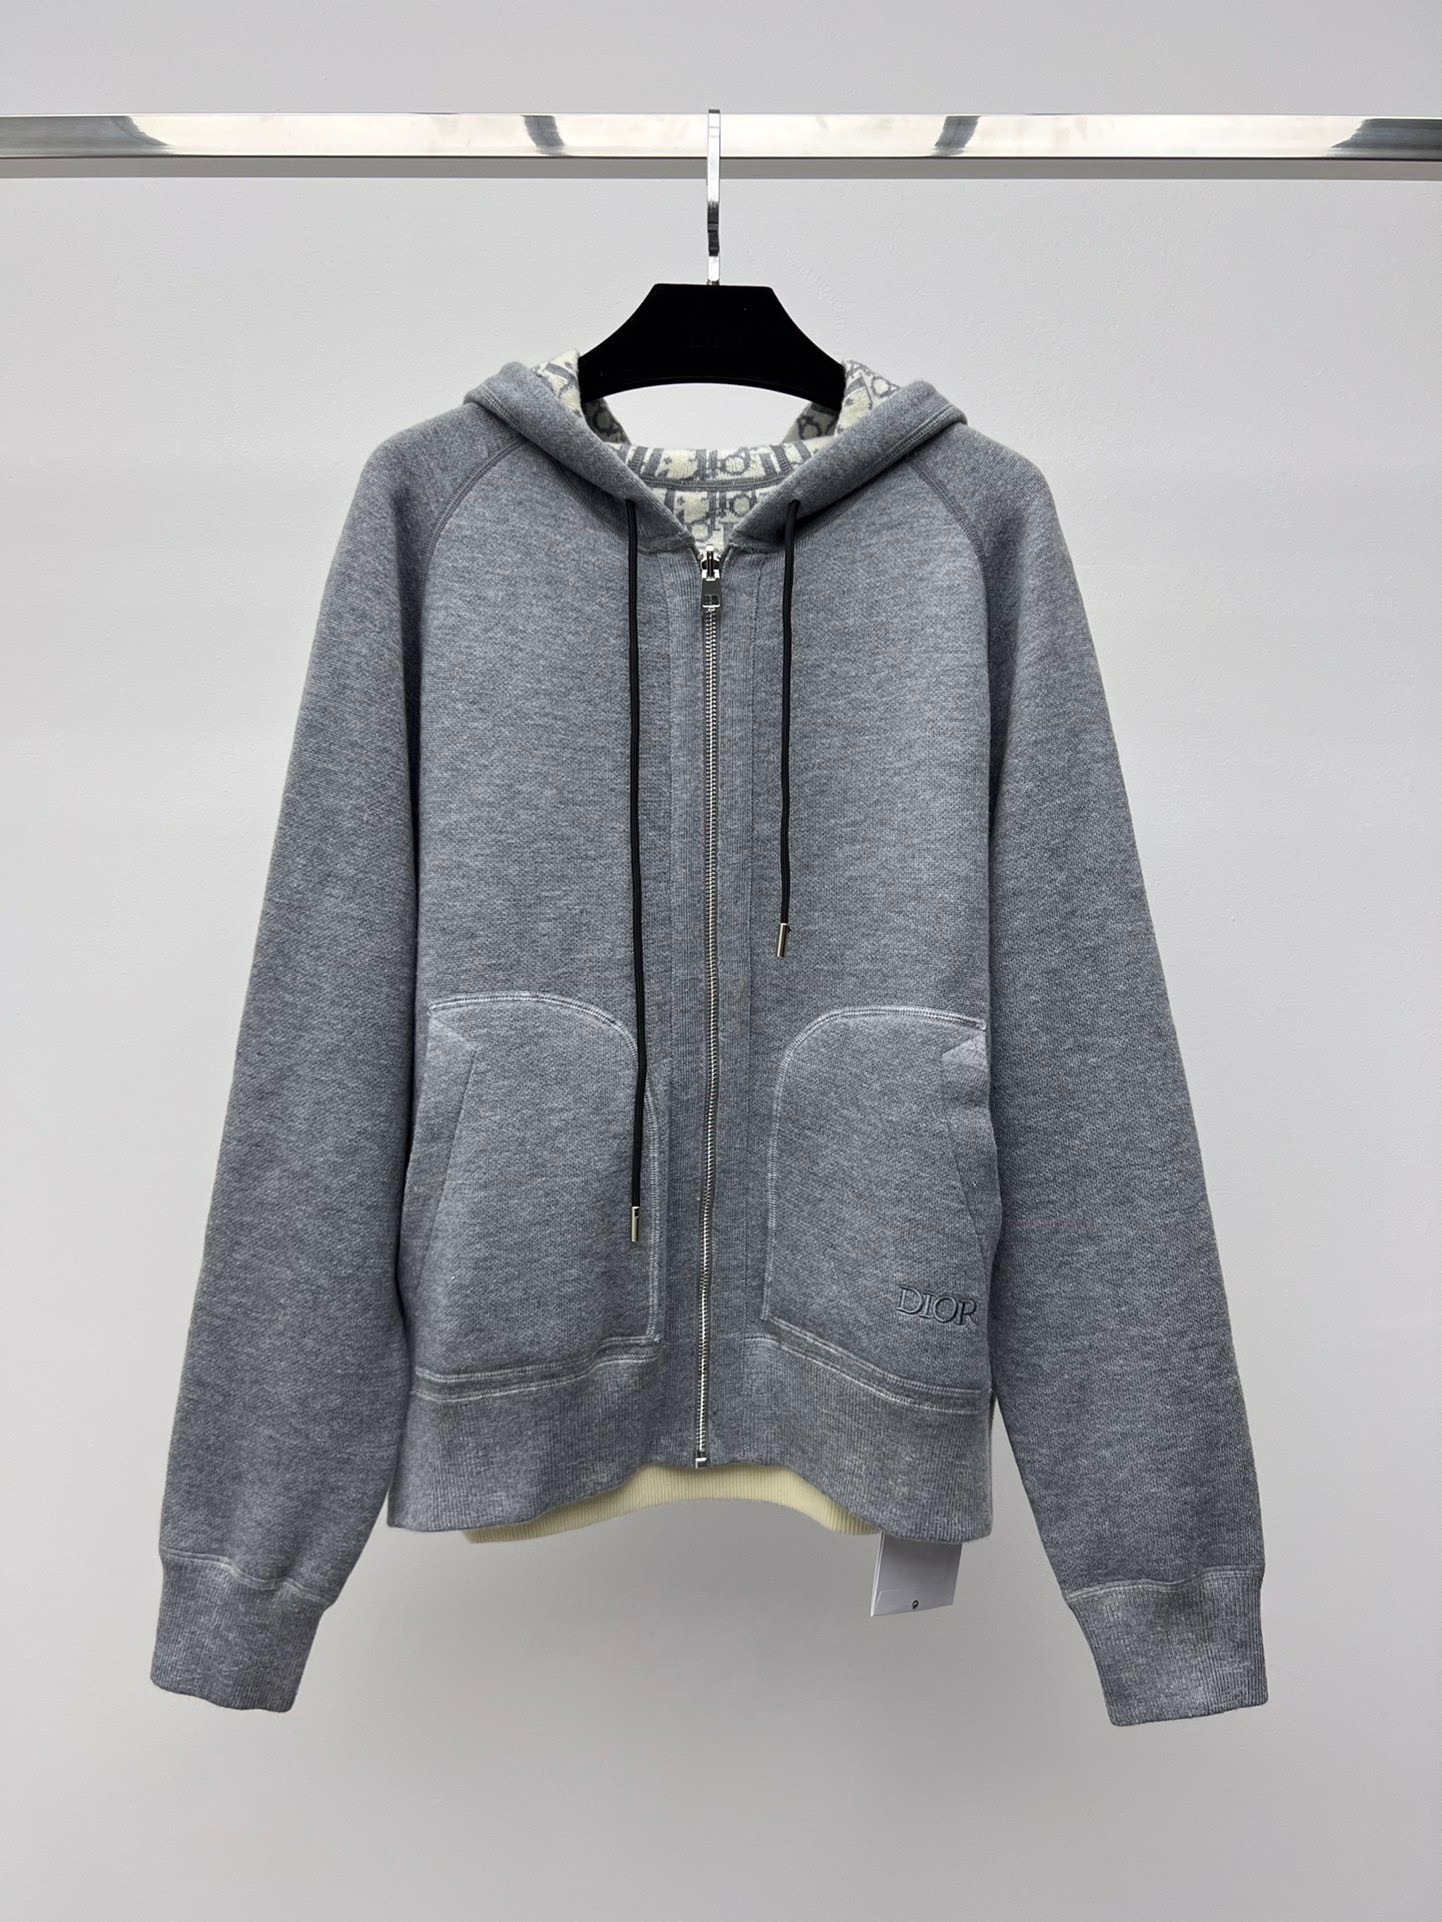 Dior Clothing Coats & Jackets Grey Printing Cashmere Wool Oblique Hooded Top